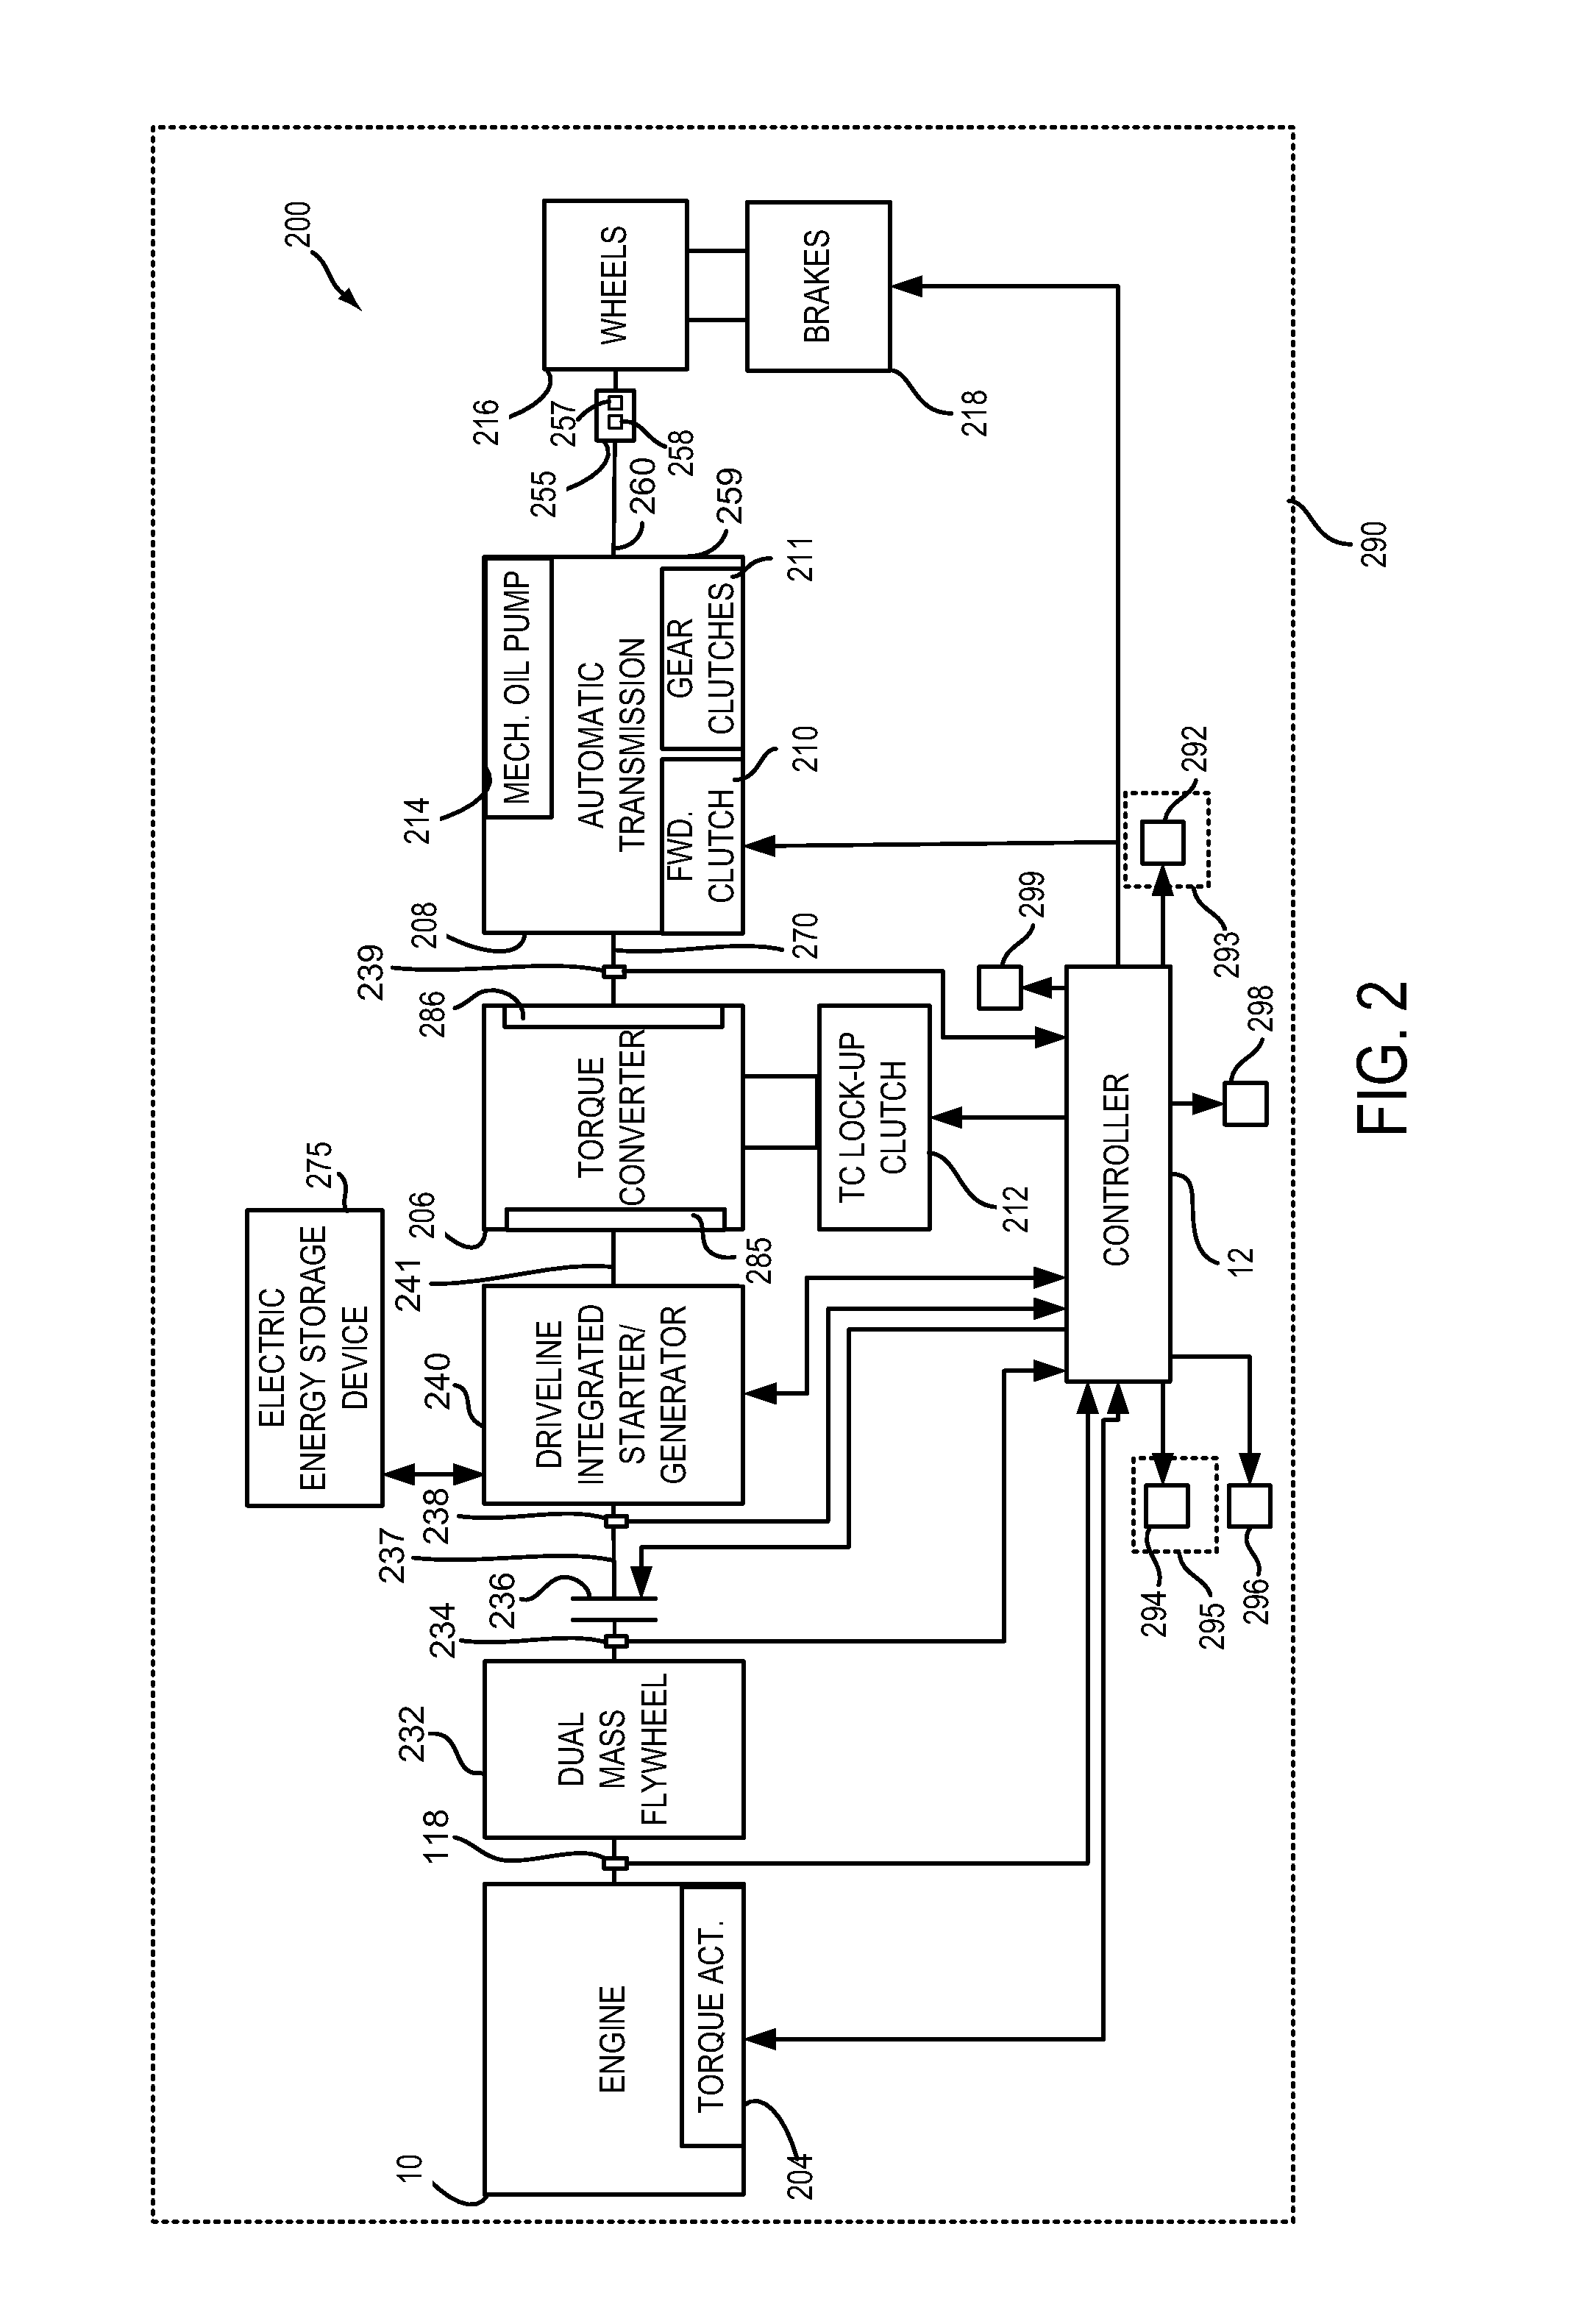 Methods and systems for operating a vehicle driveline responsive to external conditions